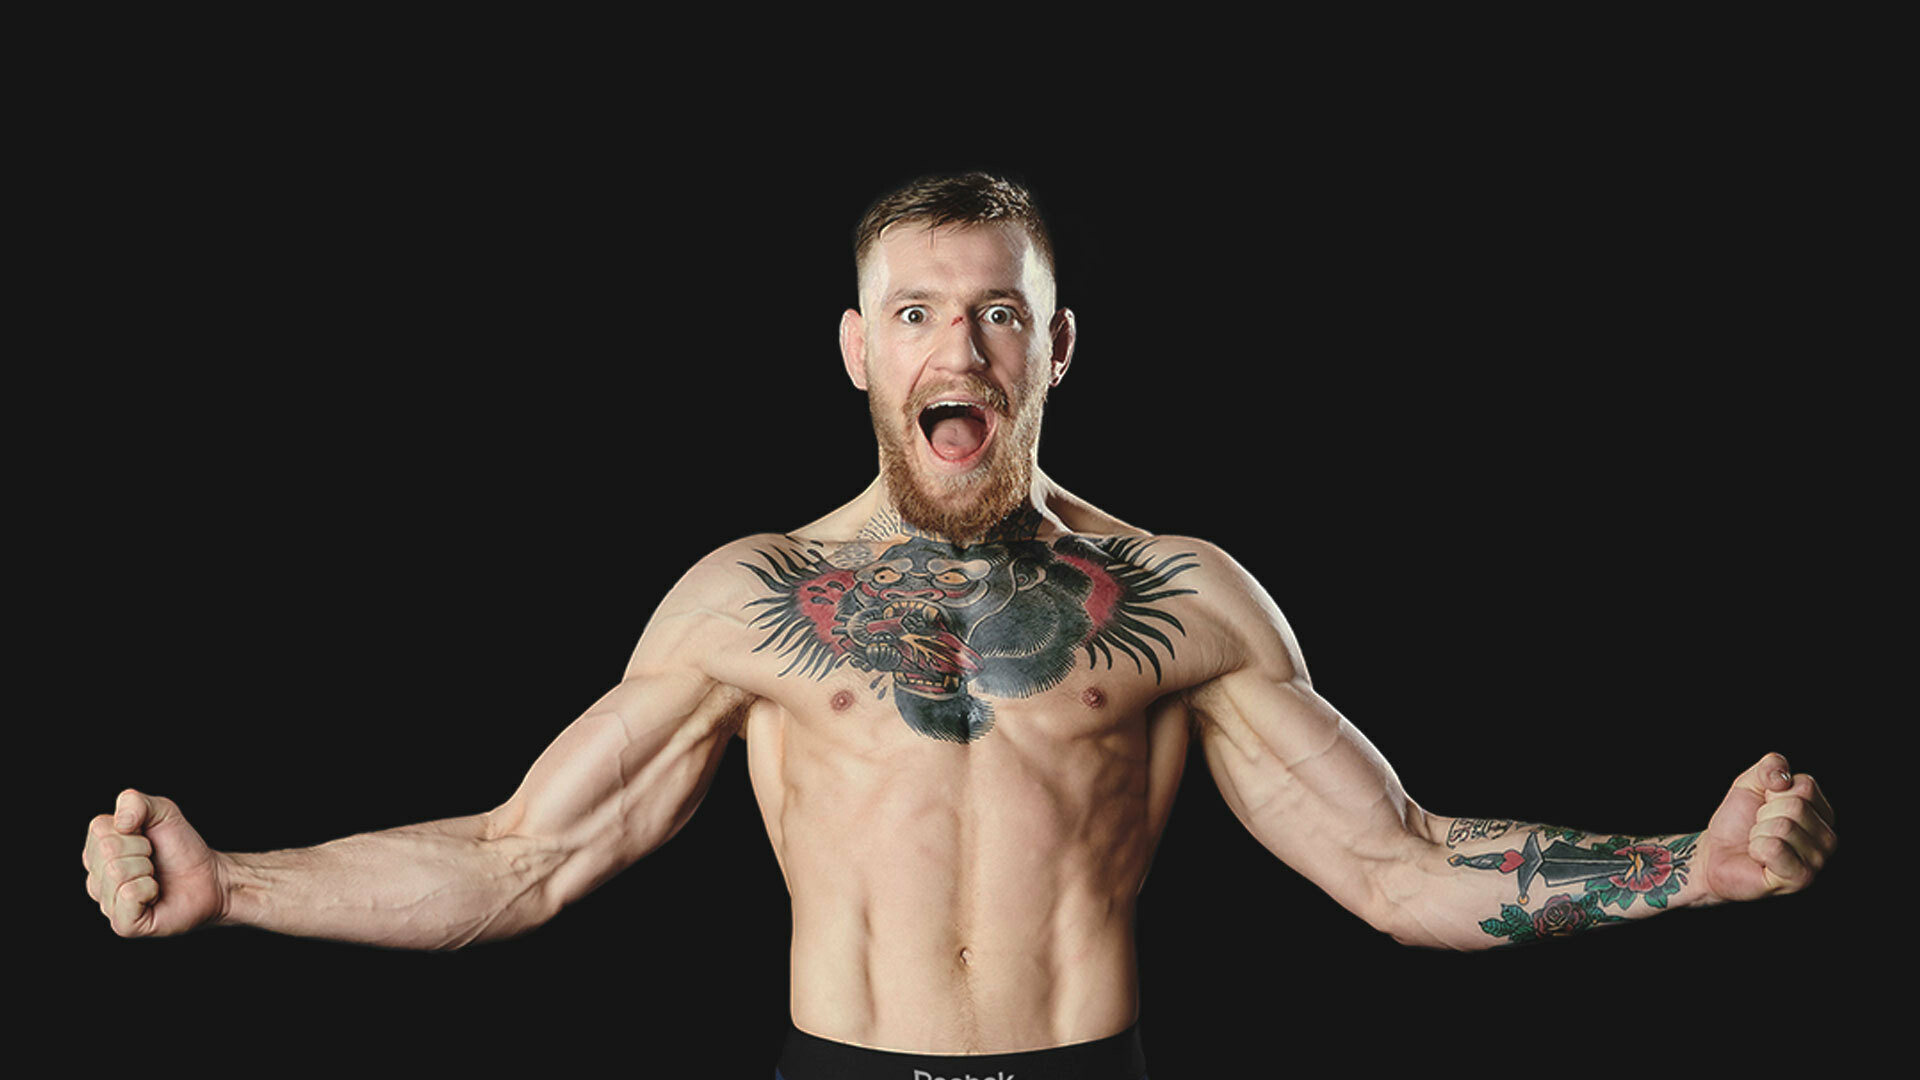 Conor McGregor: The first simultaneous multi-divisional champion in UFC history. 1920x1080 Full HD Wallpaper.